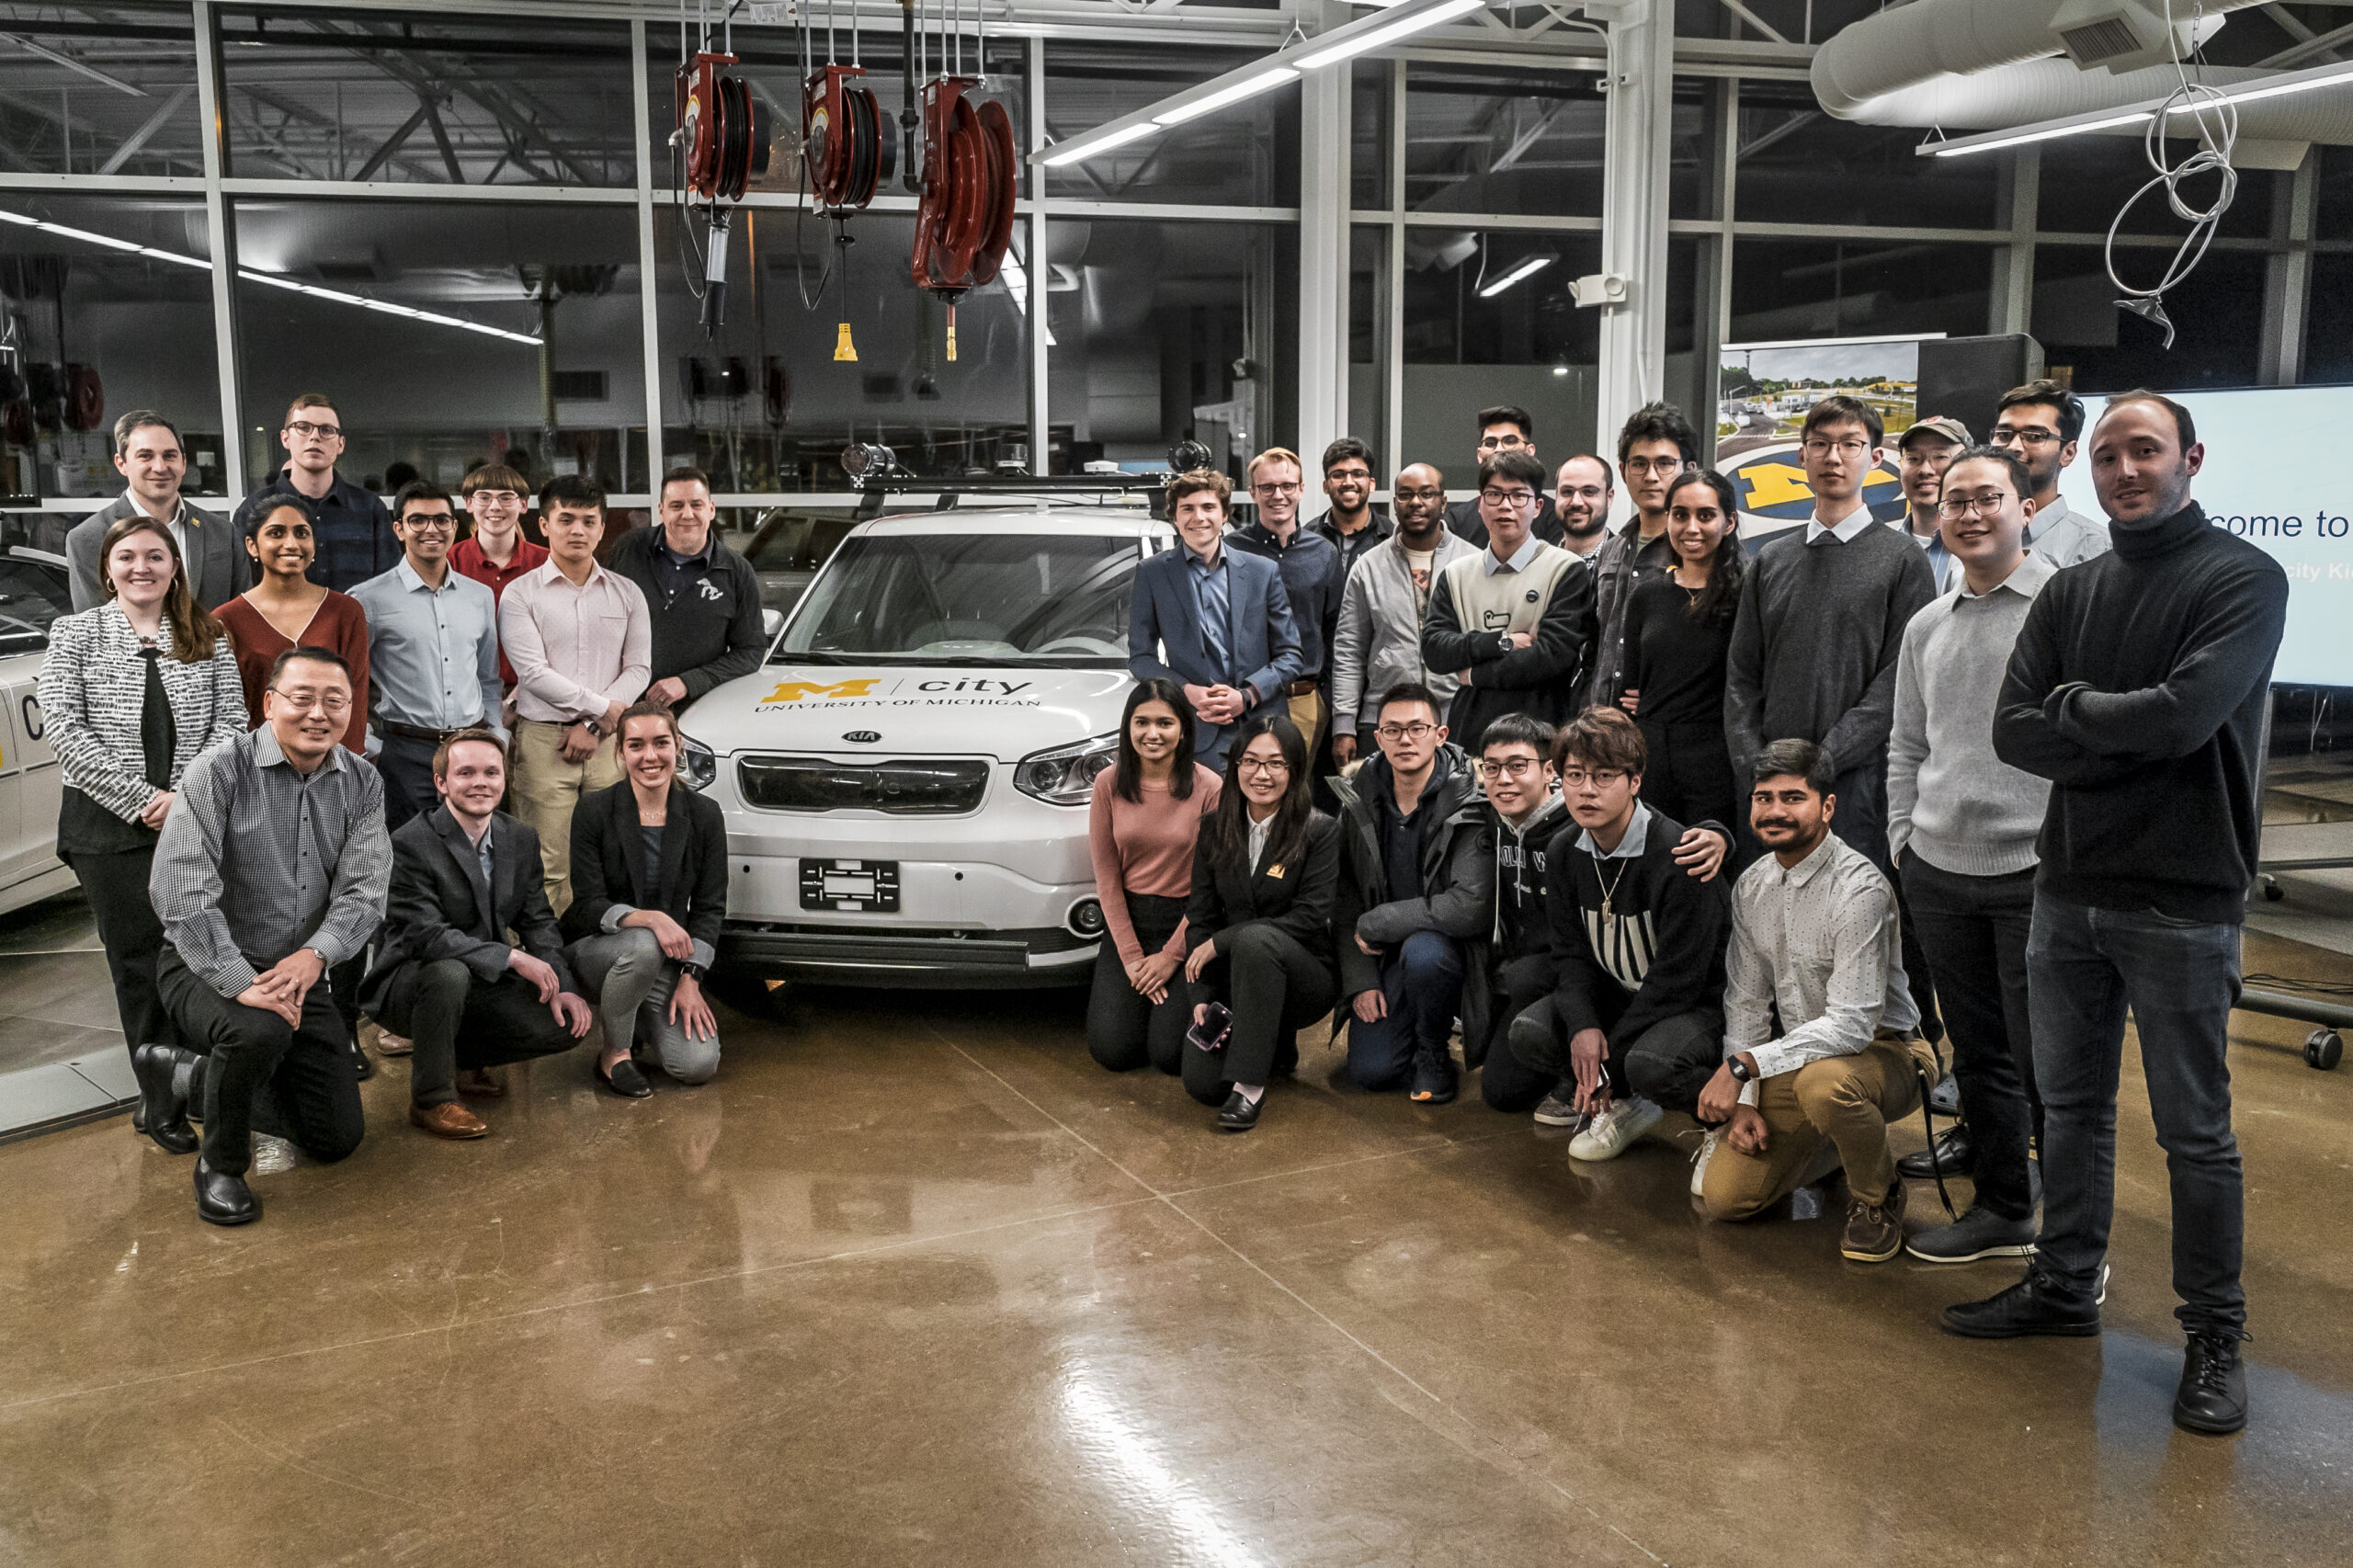 TechLab students smile while standing next to an autonomous vehicle